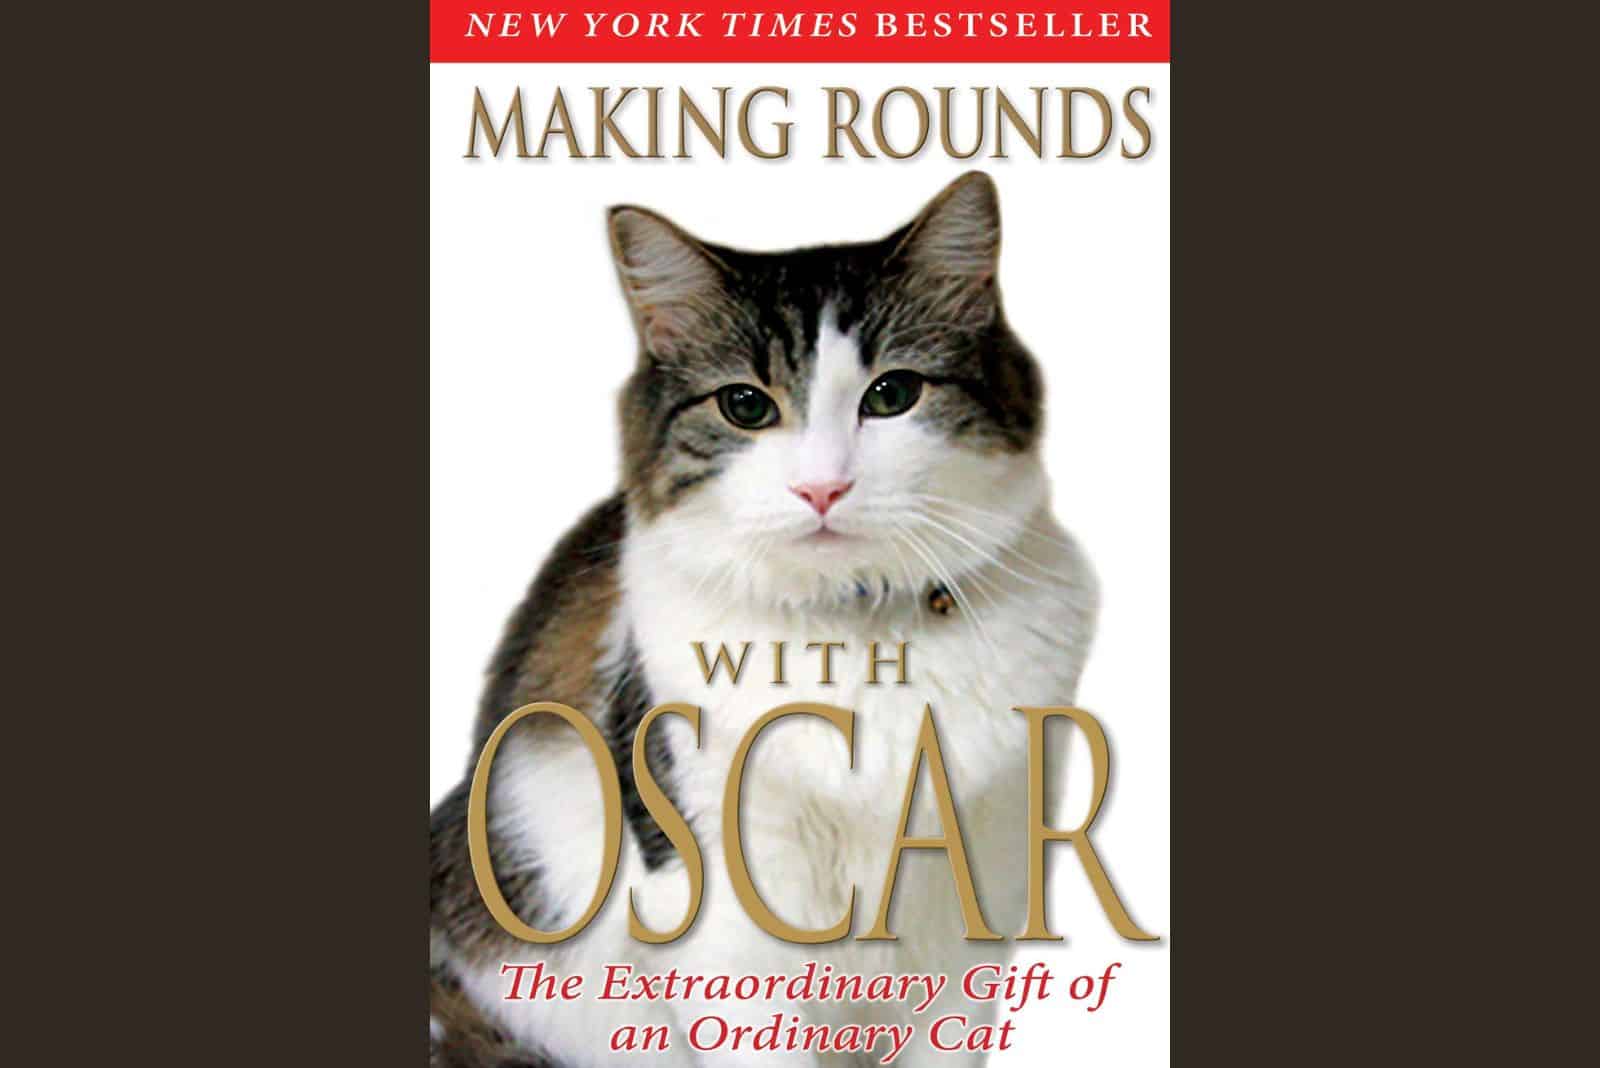 cover of the book about Oscar, the cat who could predict death